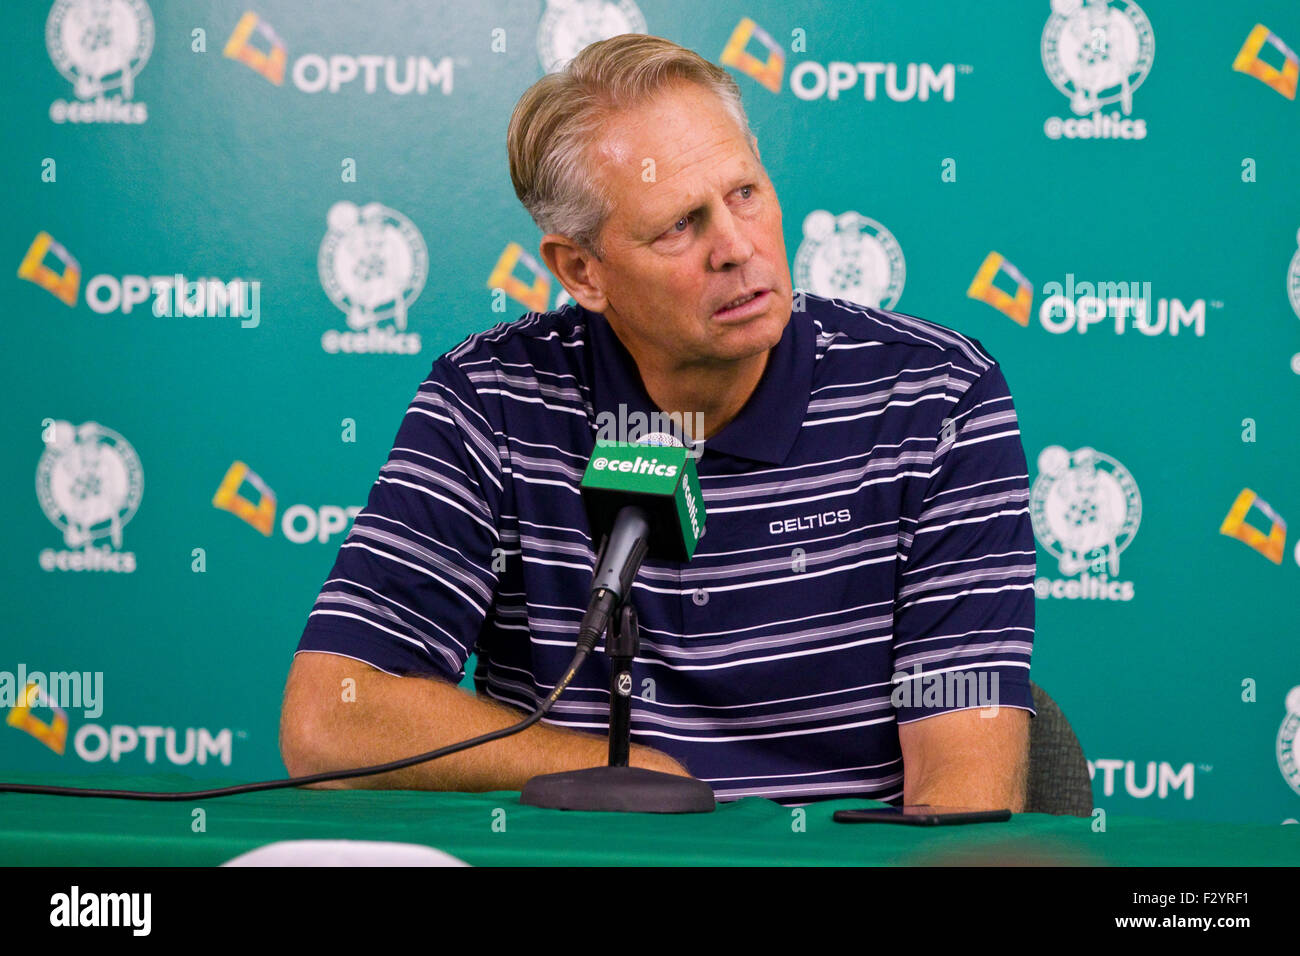 Danny Ainge of the Boston Celtics sits with his kid during the Boston  Fotografía de noticias - Getty Images